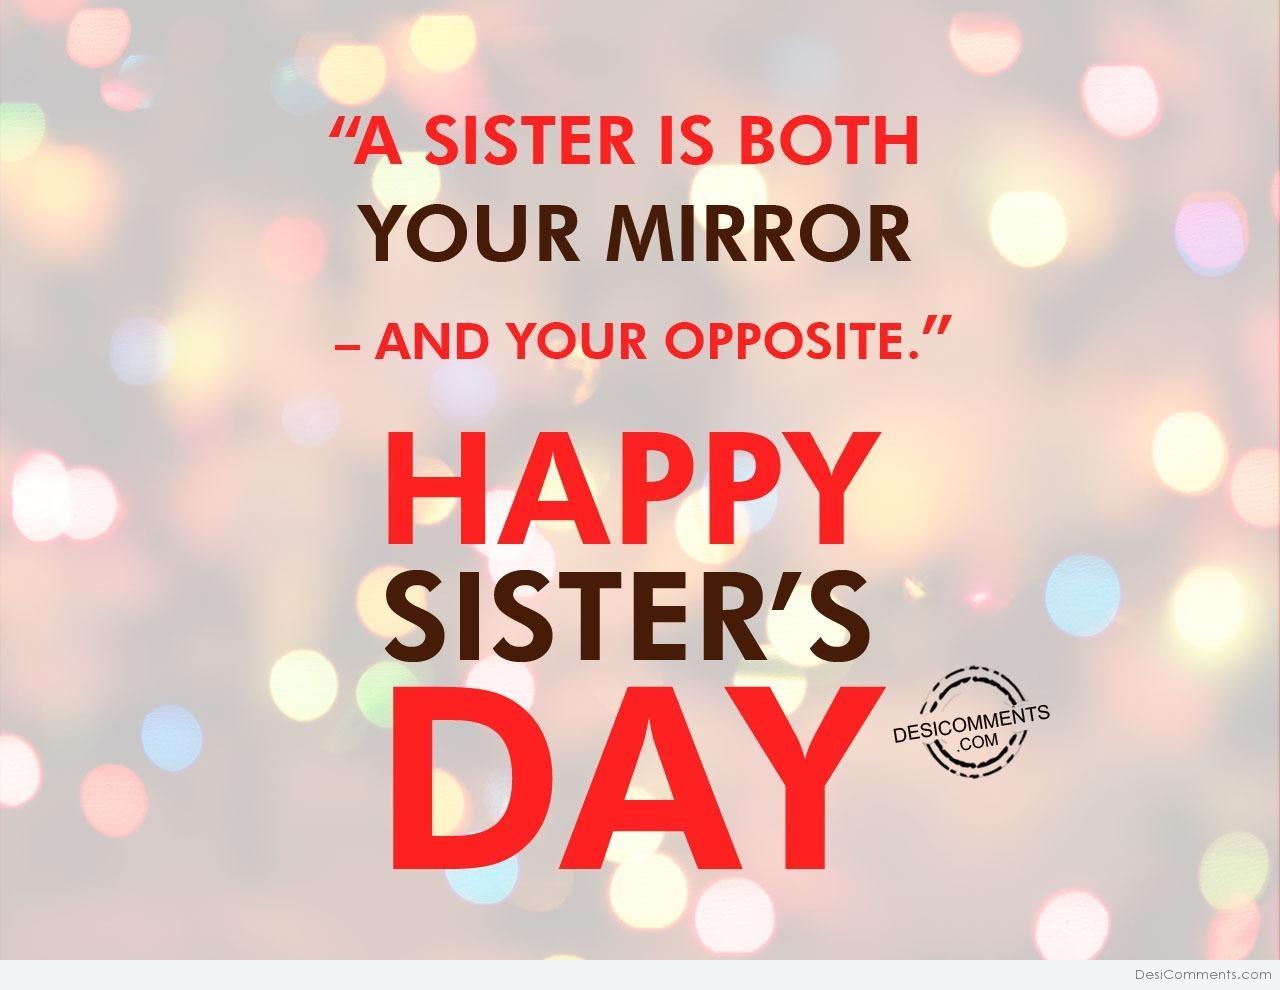 National sisters day wallpapers